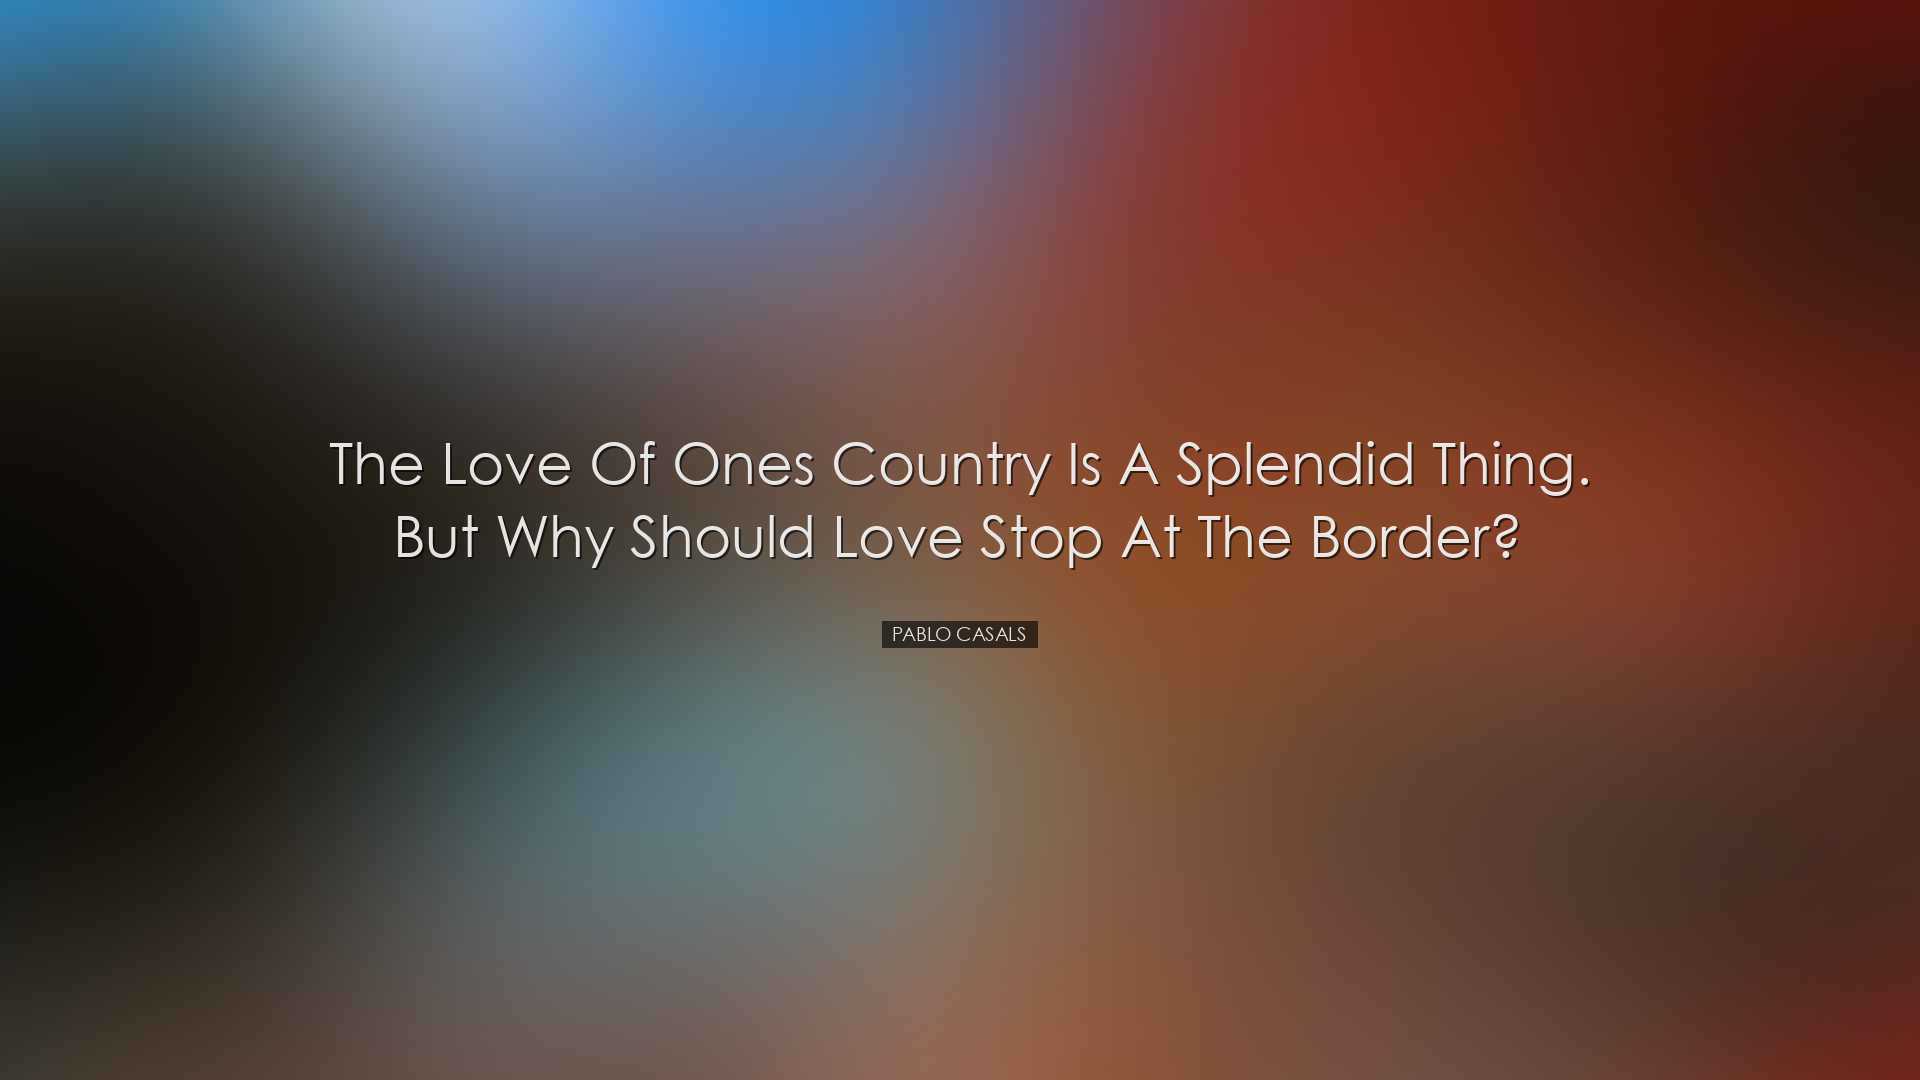 The love of ones country is a splendid thing. But why should love